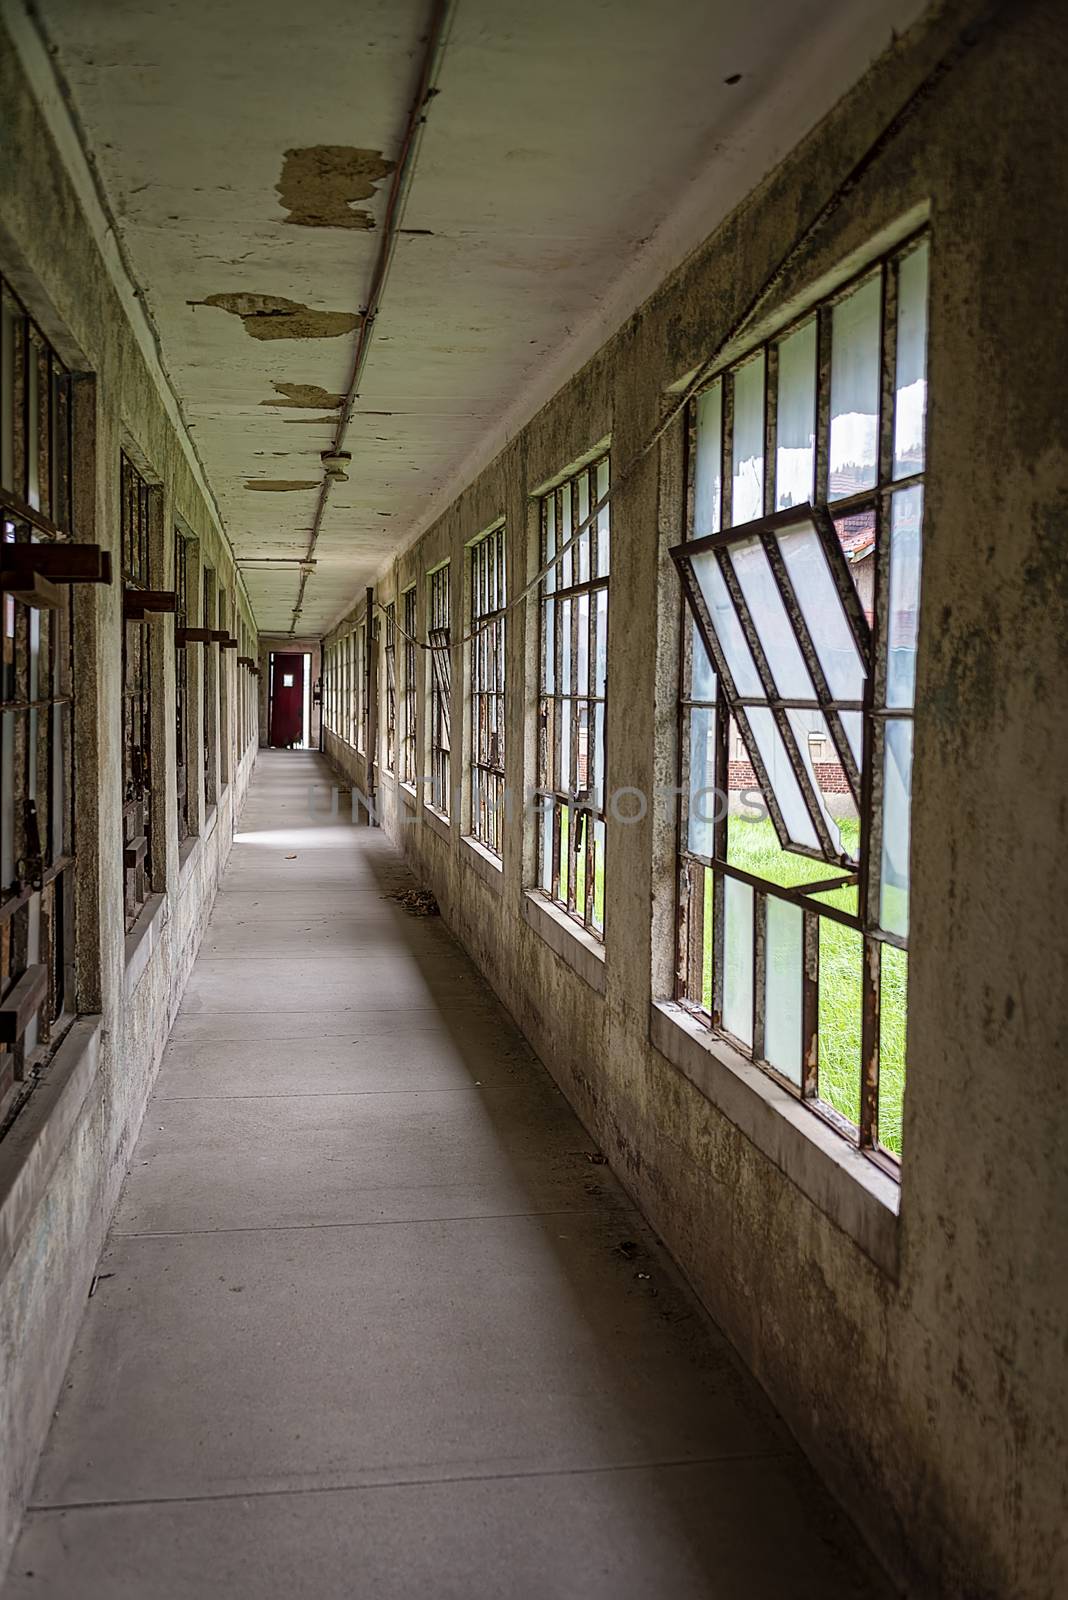 USA, New York, Ellis Island - May 2019: decayed corridor leading to a red exit door